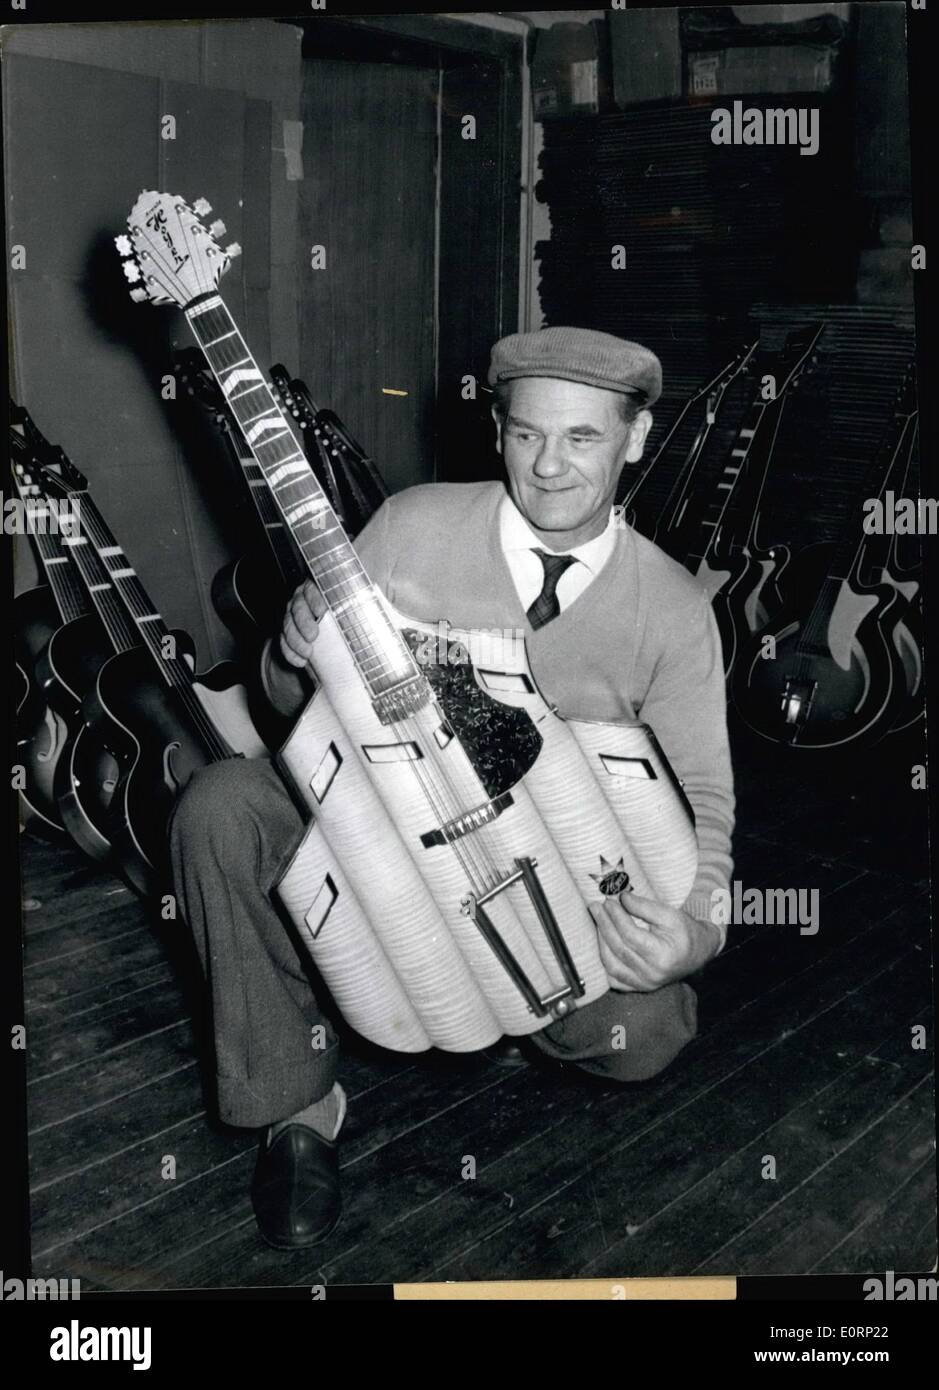 Apr. 04, 1960 - To get better sound: guitar master Arnold Hoyer (ARNOLD  HOYER) of Tennenlohe (TENNENLOHE) near Erlangen/West-Germany constructed a  ''bulb guitar'' whose sound compounds are like organ pipes. This new